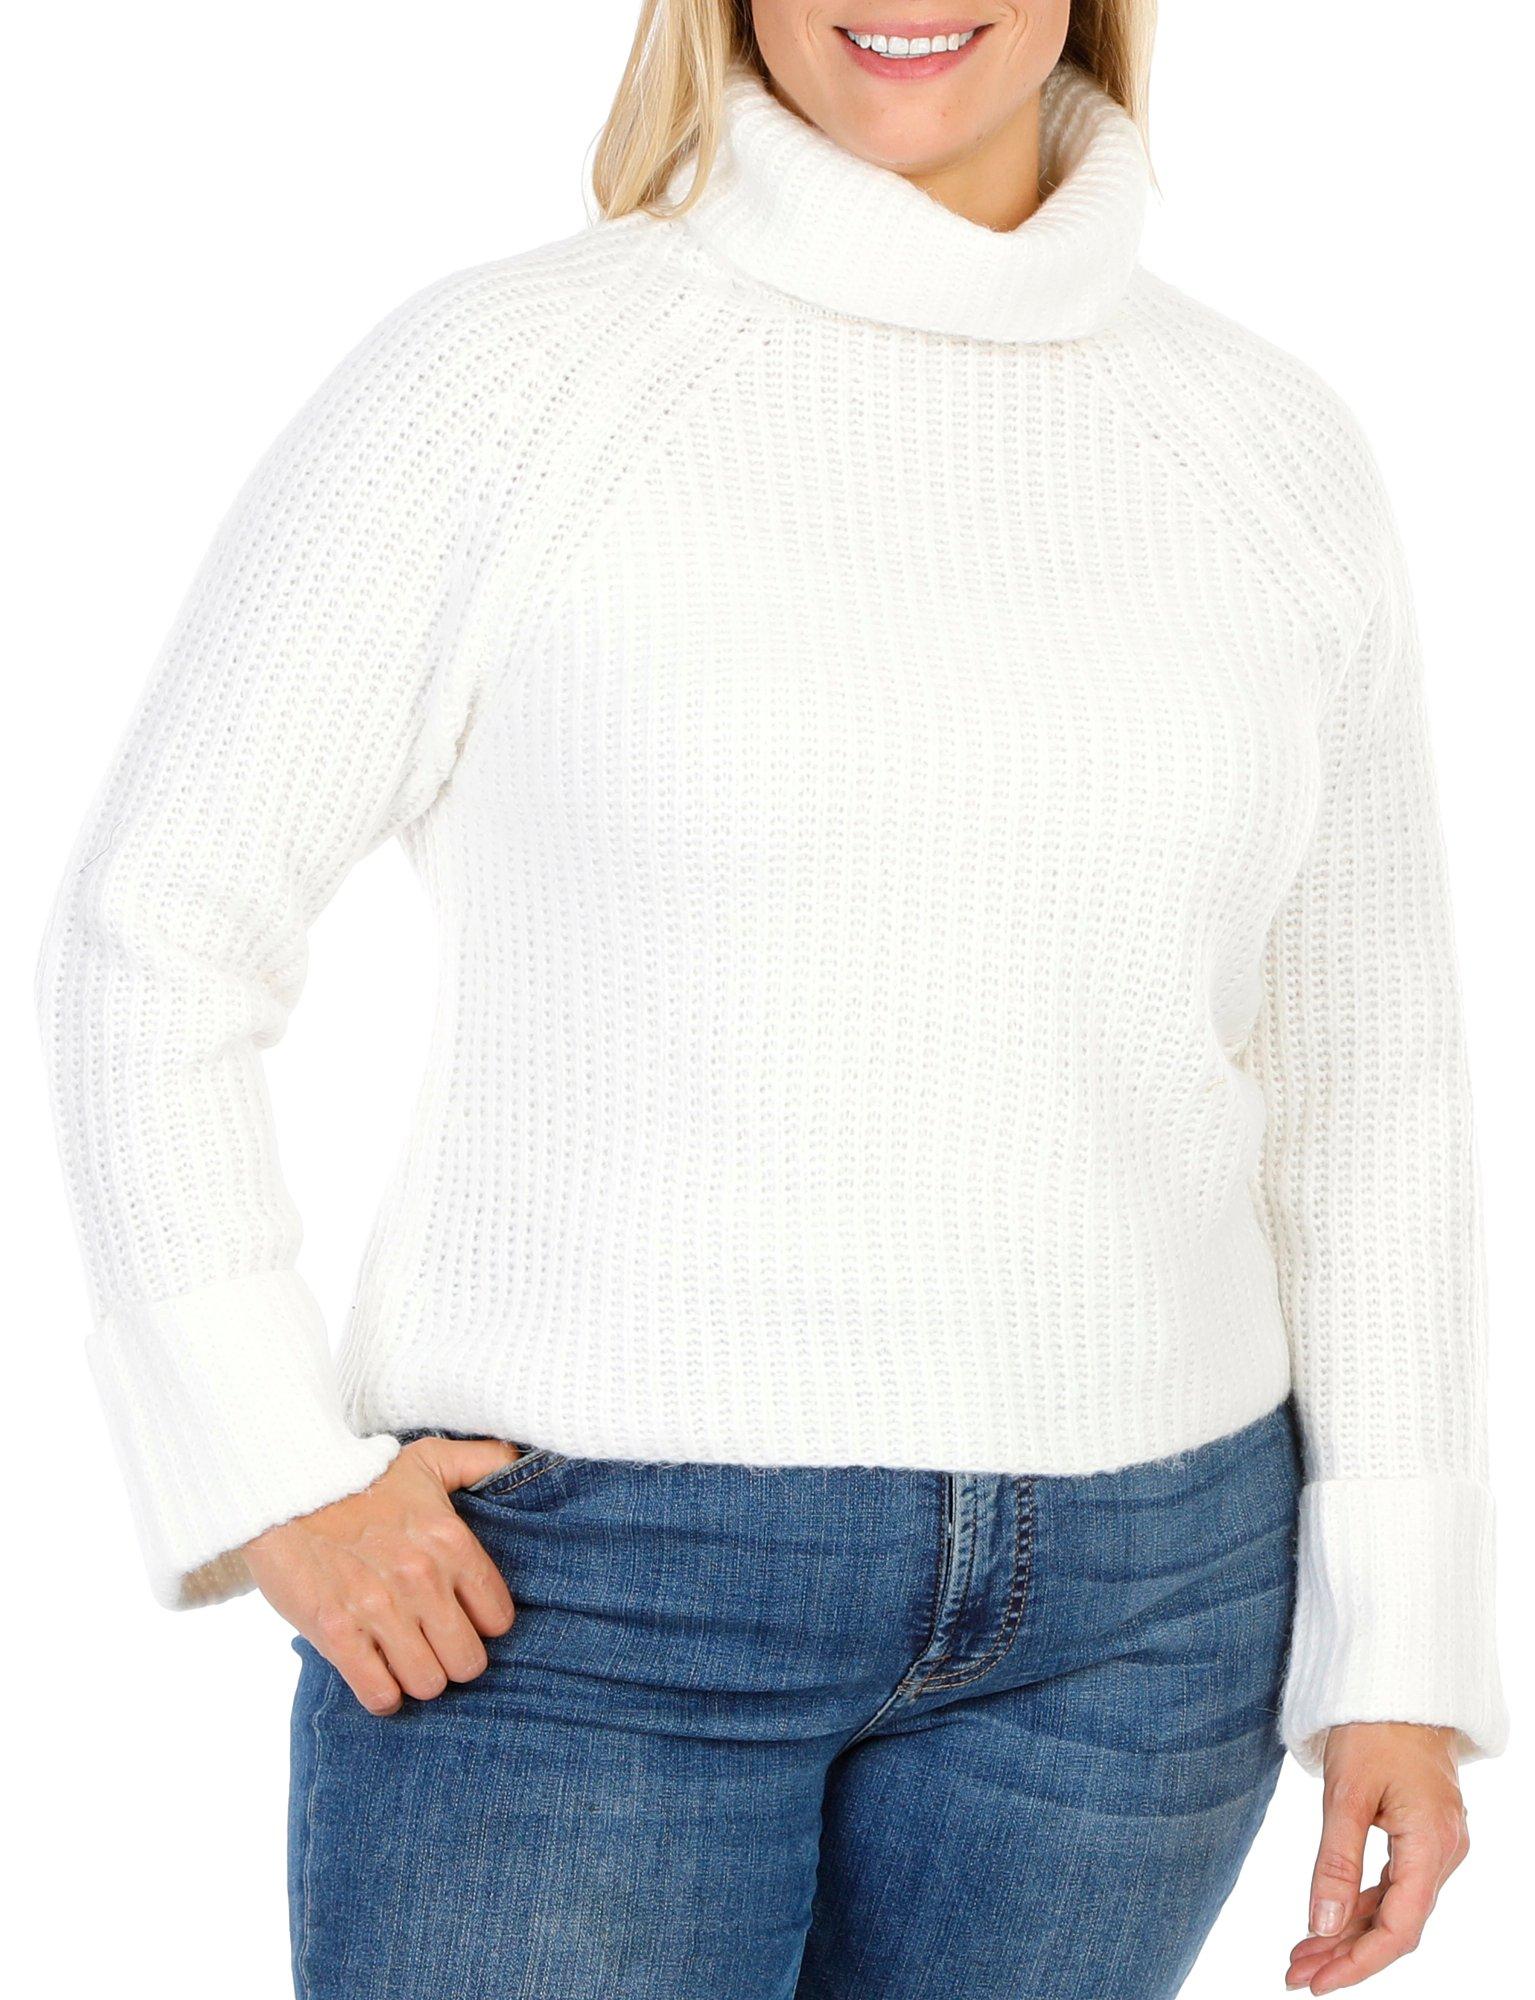 Juniors Cable Knit Turtle Neck Sweater